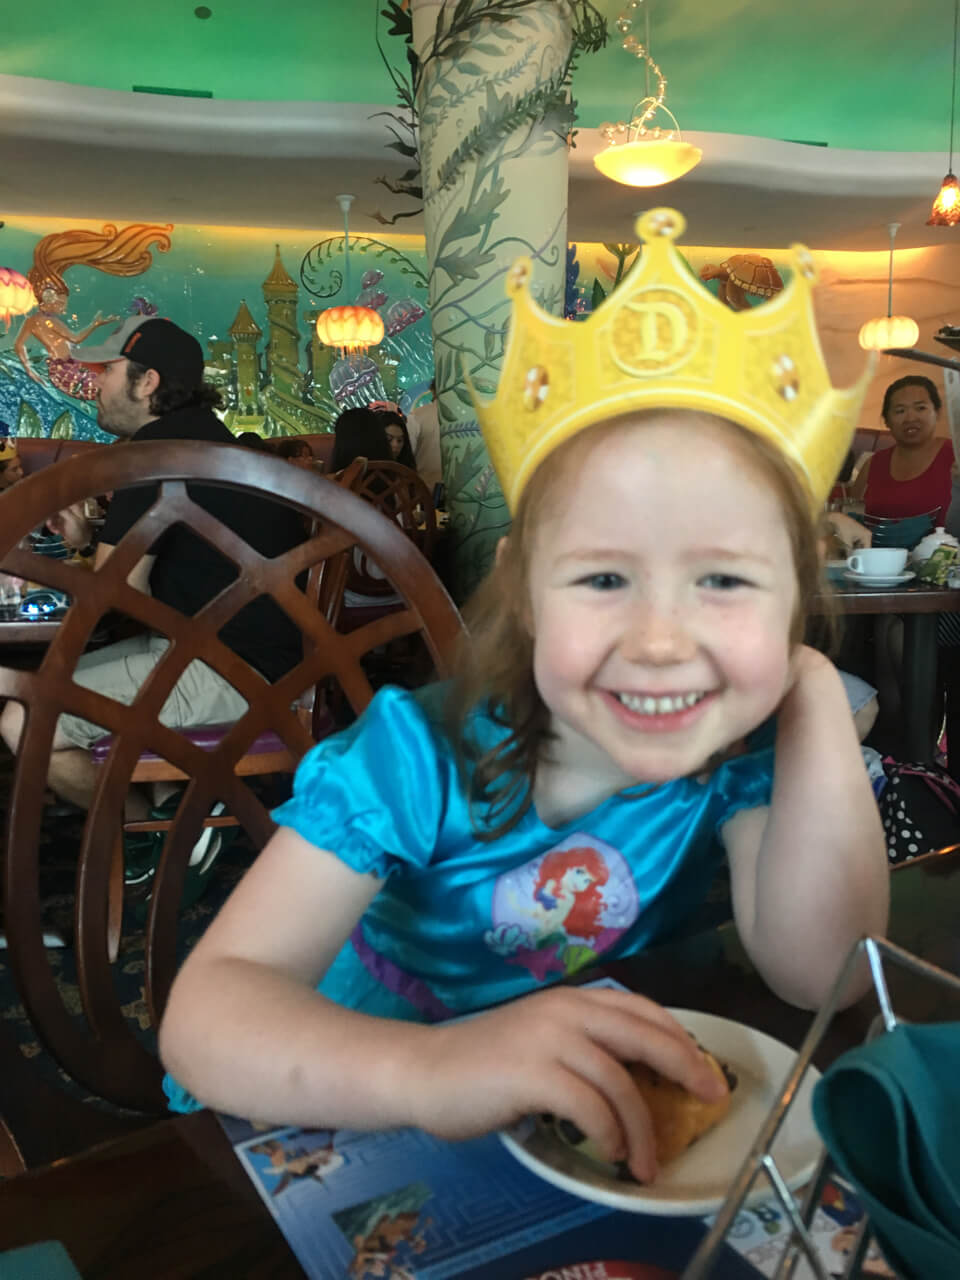 a beginner's guide to Disneyland with kids